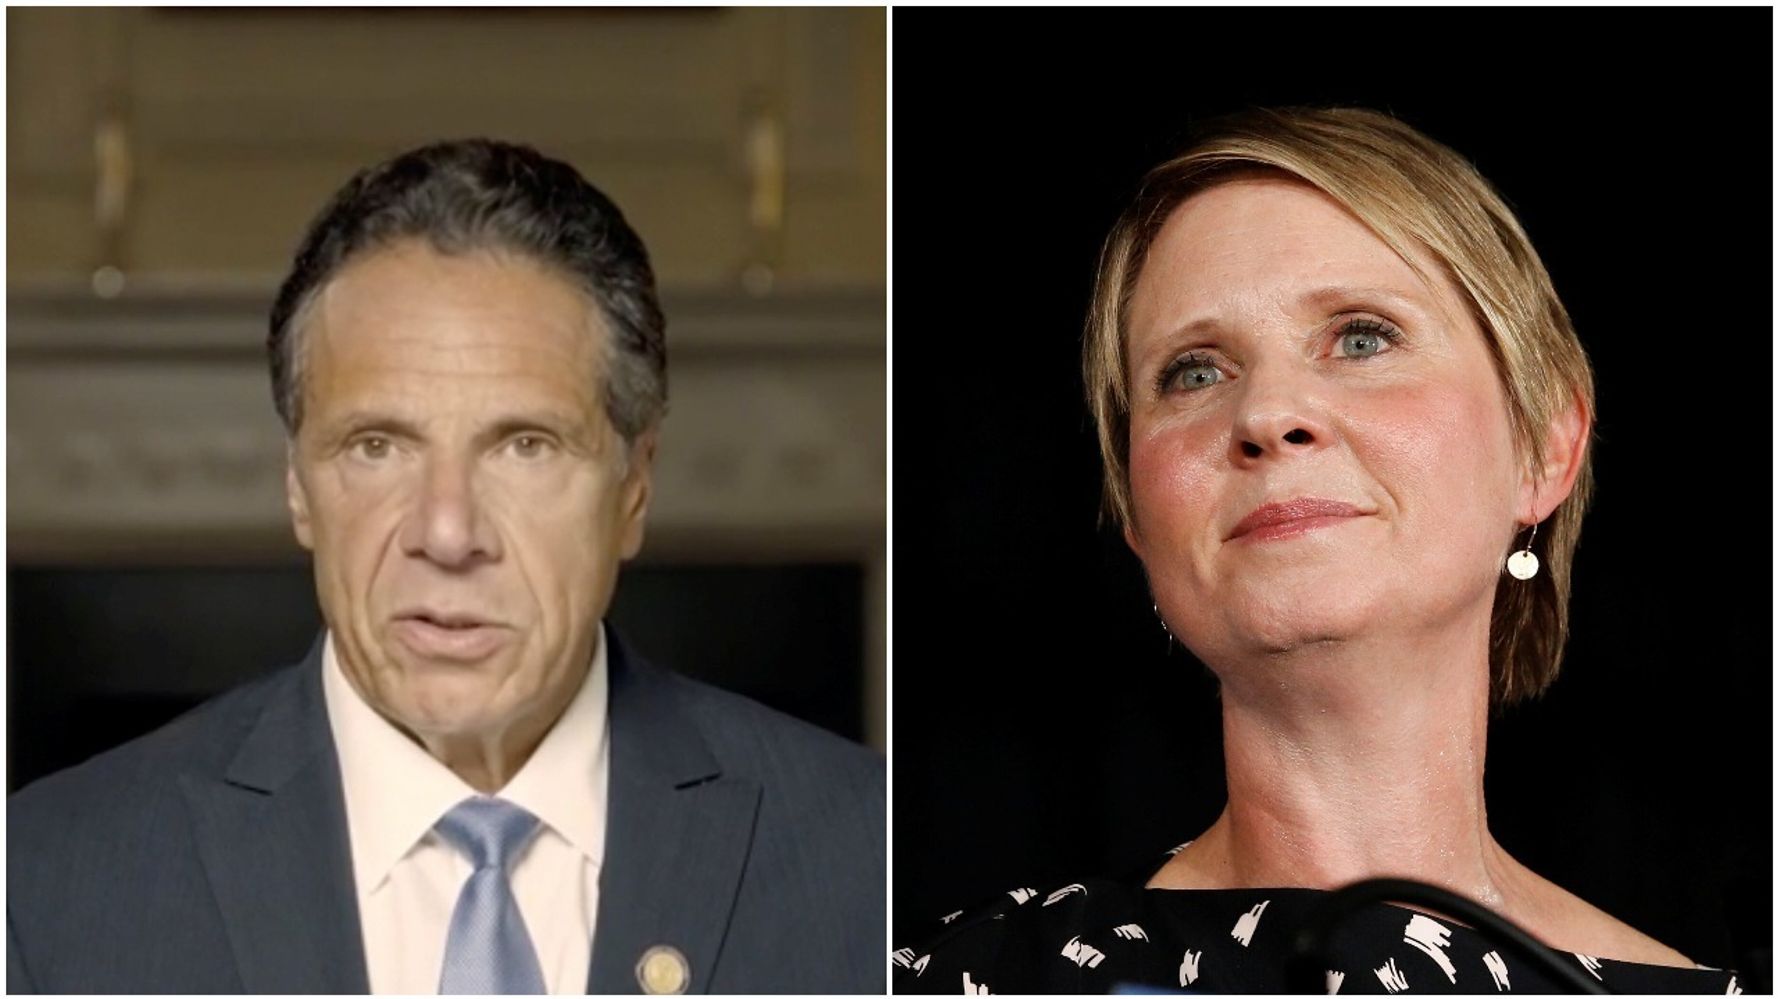 Andrew Cuomo Beat Cynthia Nixon For New York Governor But She Gets Last Laugh